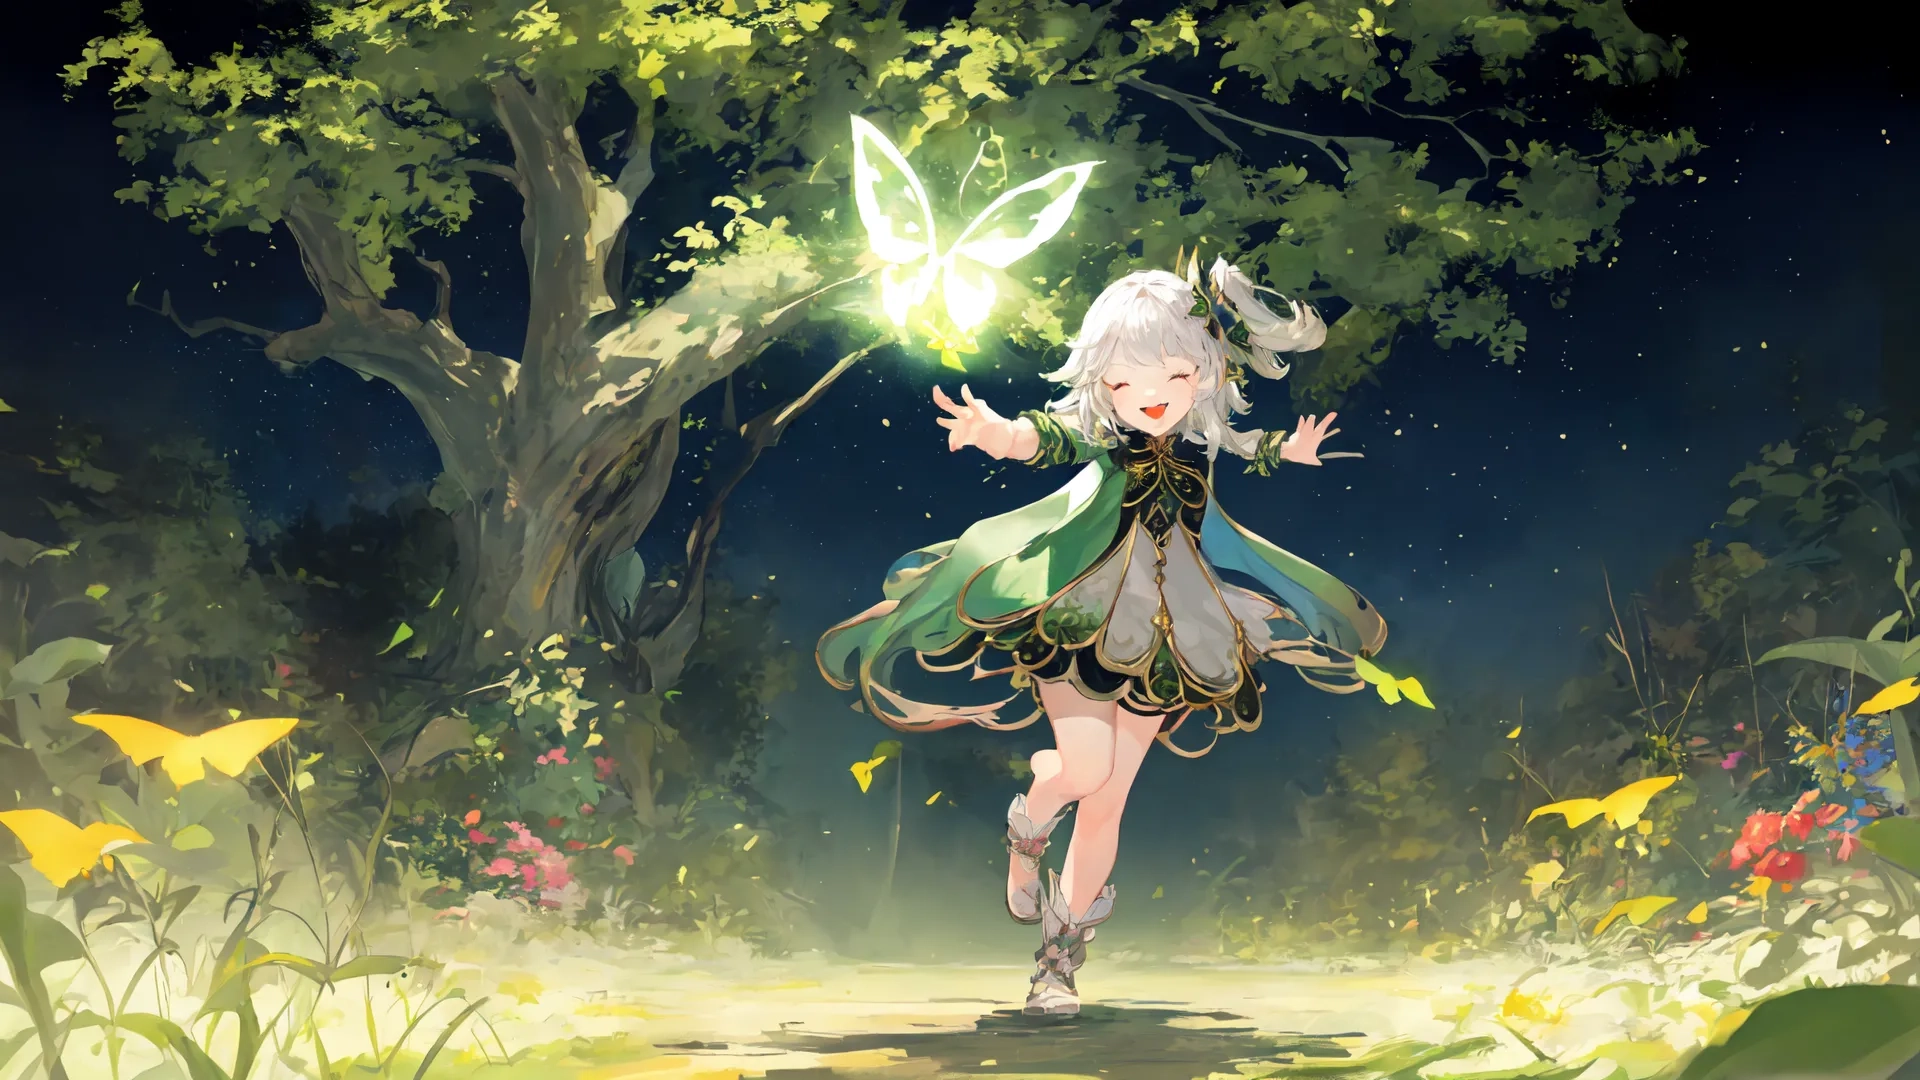 the girl in this image is very cute and pretty playing with sparklers in a beautiful forest area, with all kinds of flowers all around, and leaves,
